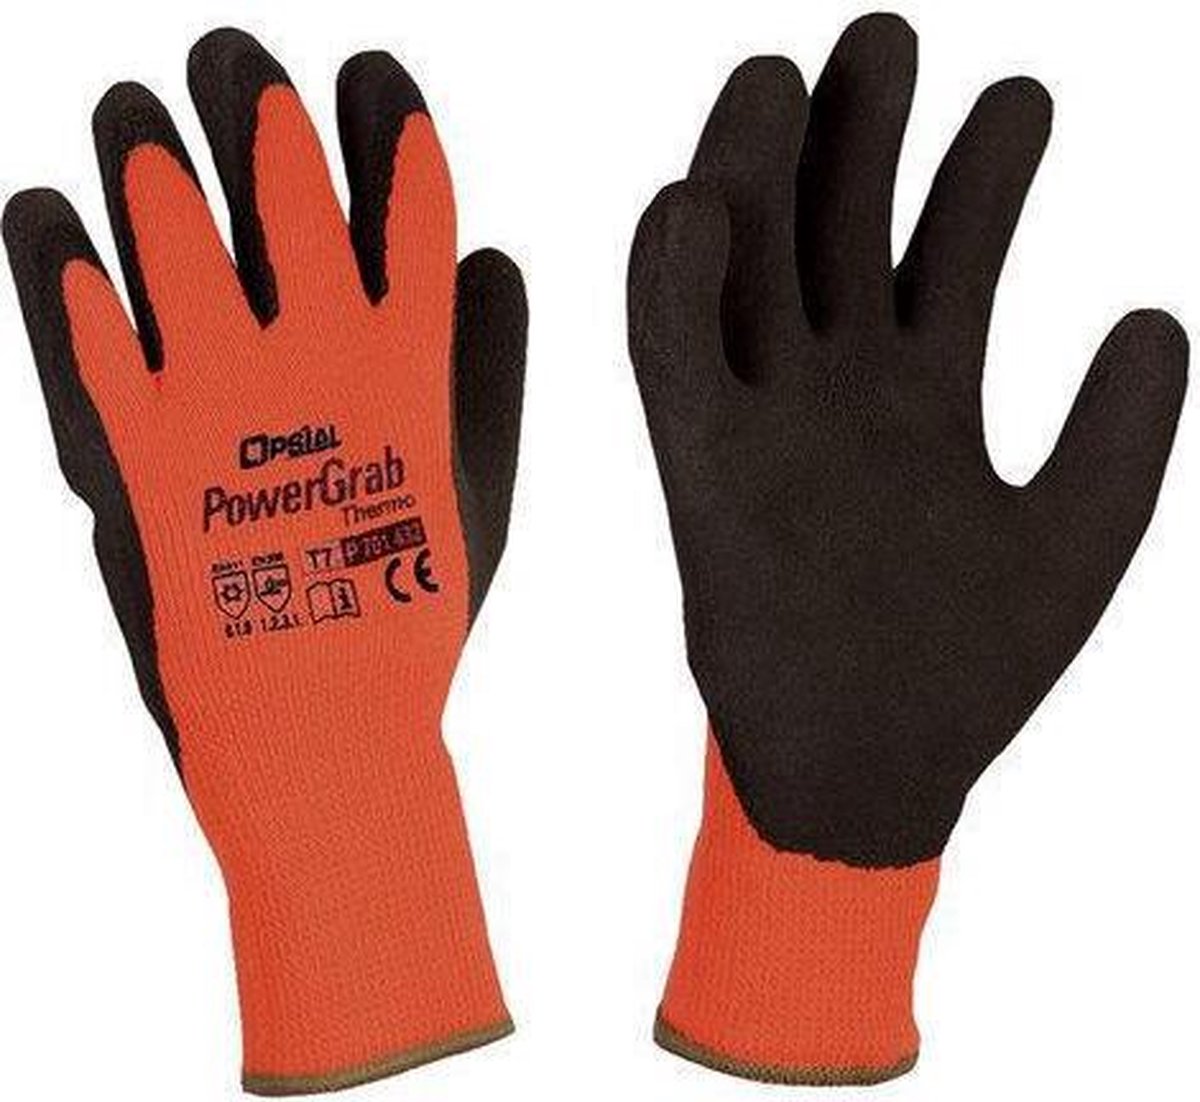 Gants de travail Opsial Powergrab Thermo taille 9 | bol.com